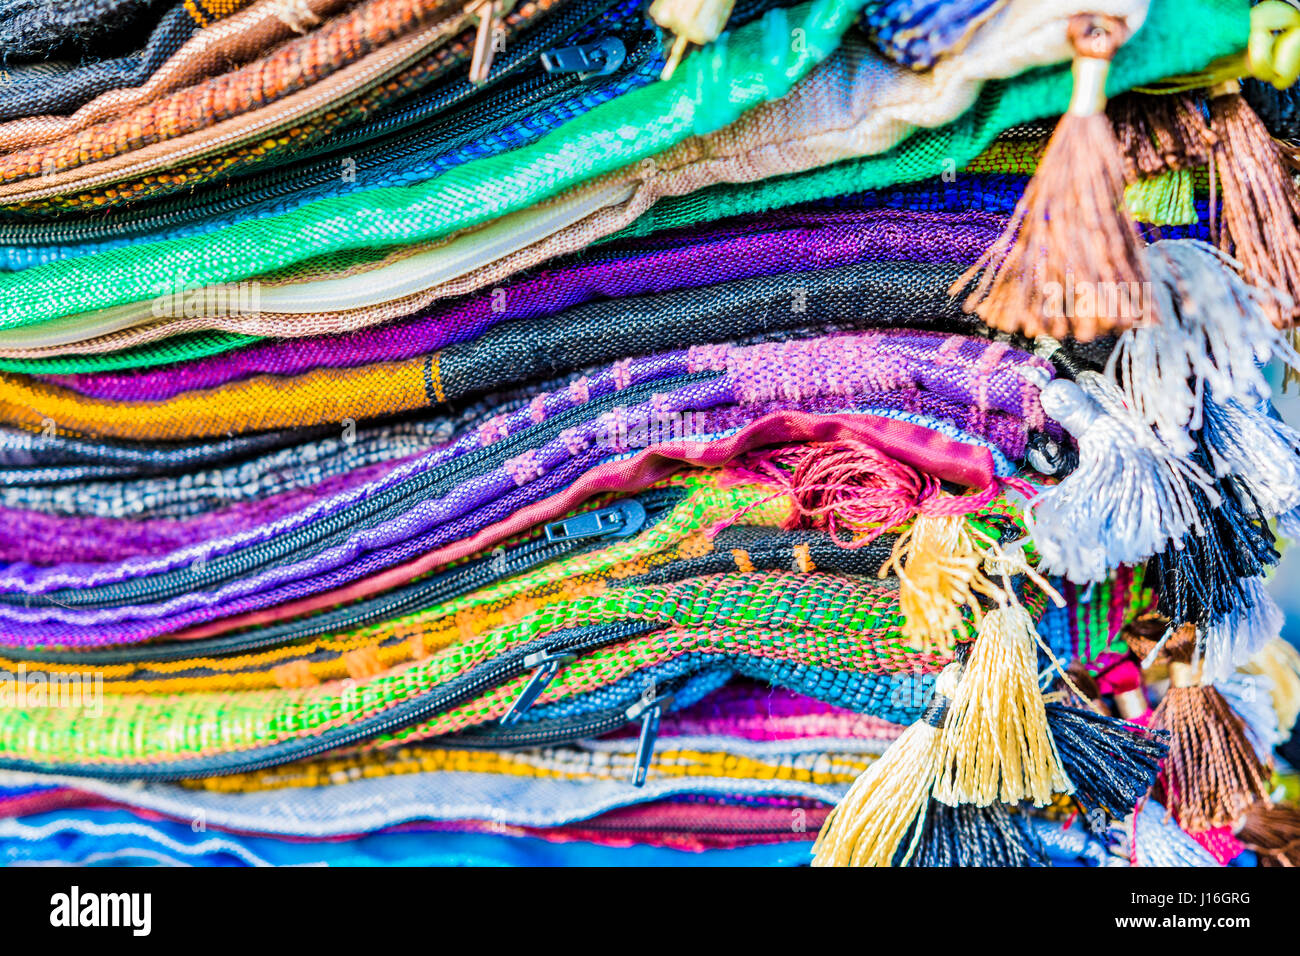 Colored Fabrics. Fes, Morocco, North Africa Stock Photo